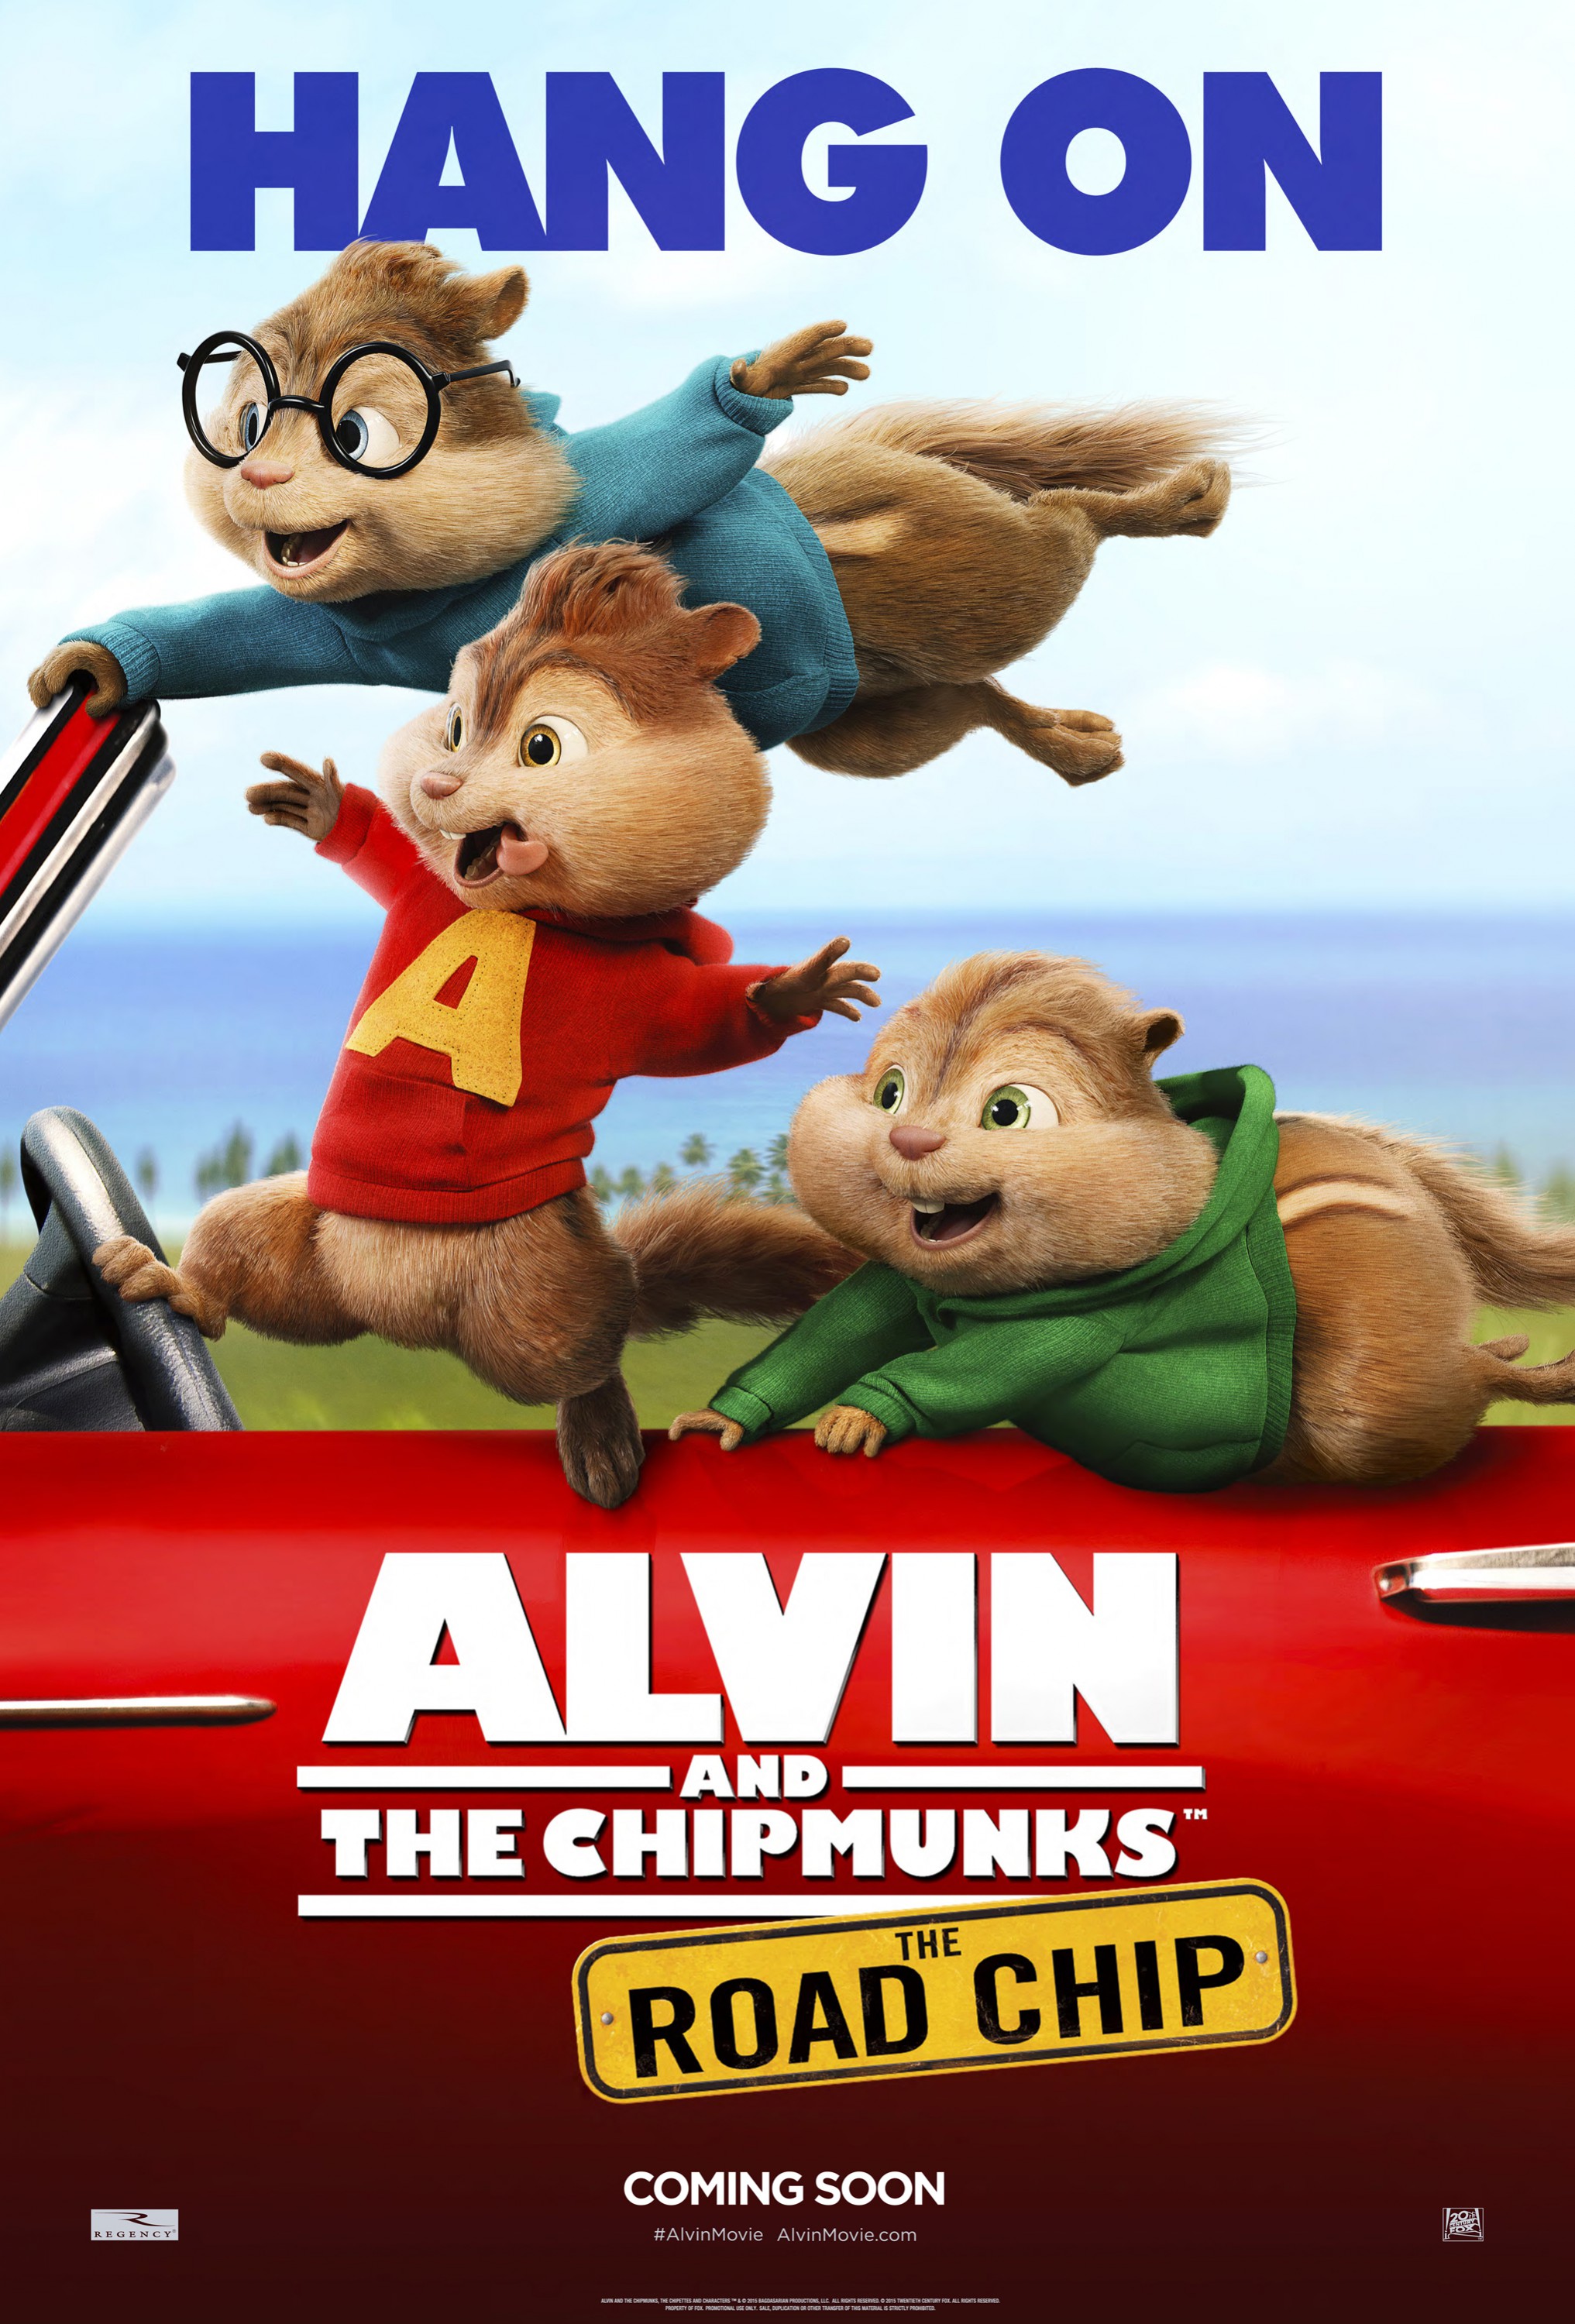 Alvin And The Chipmunks: The Road Chip #3